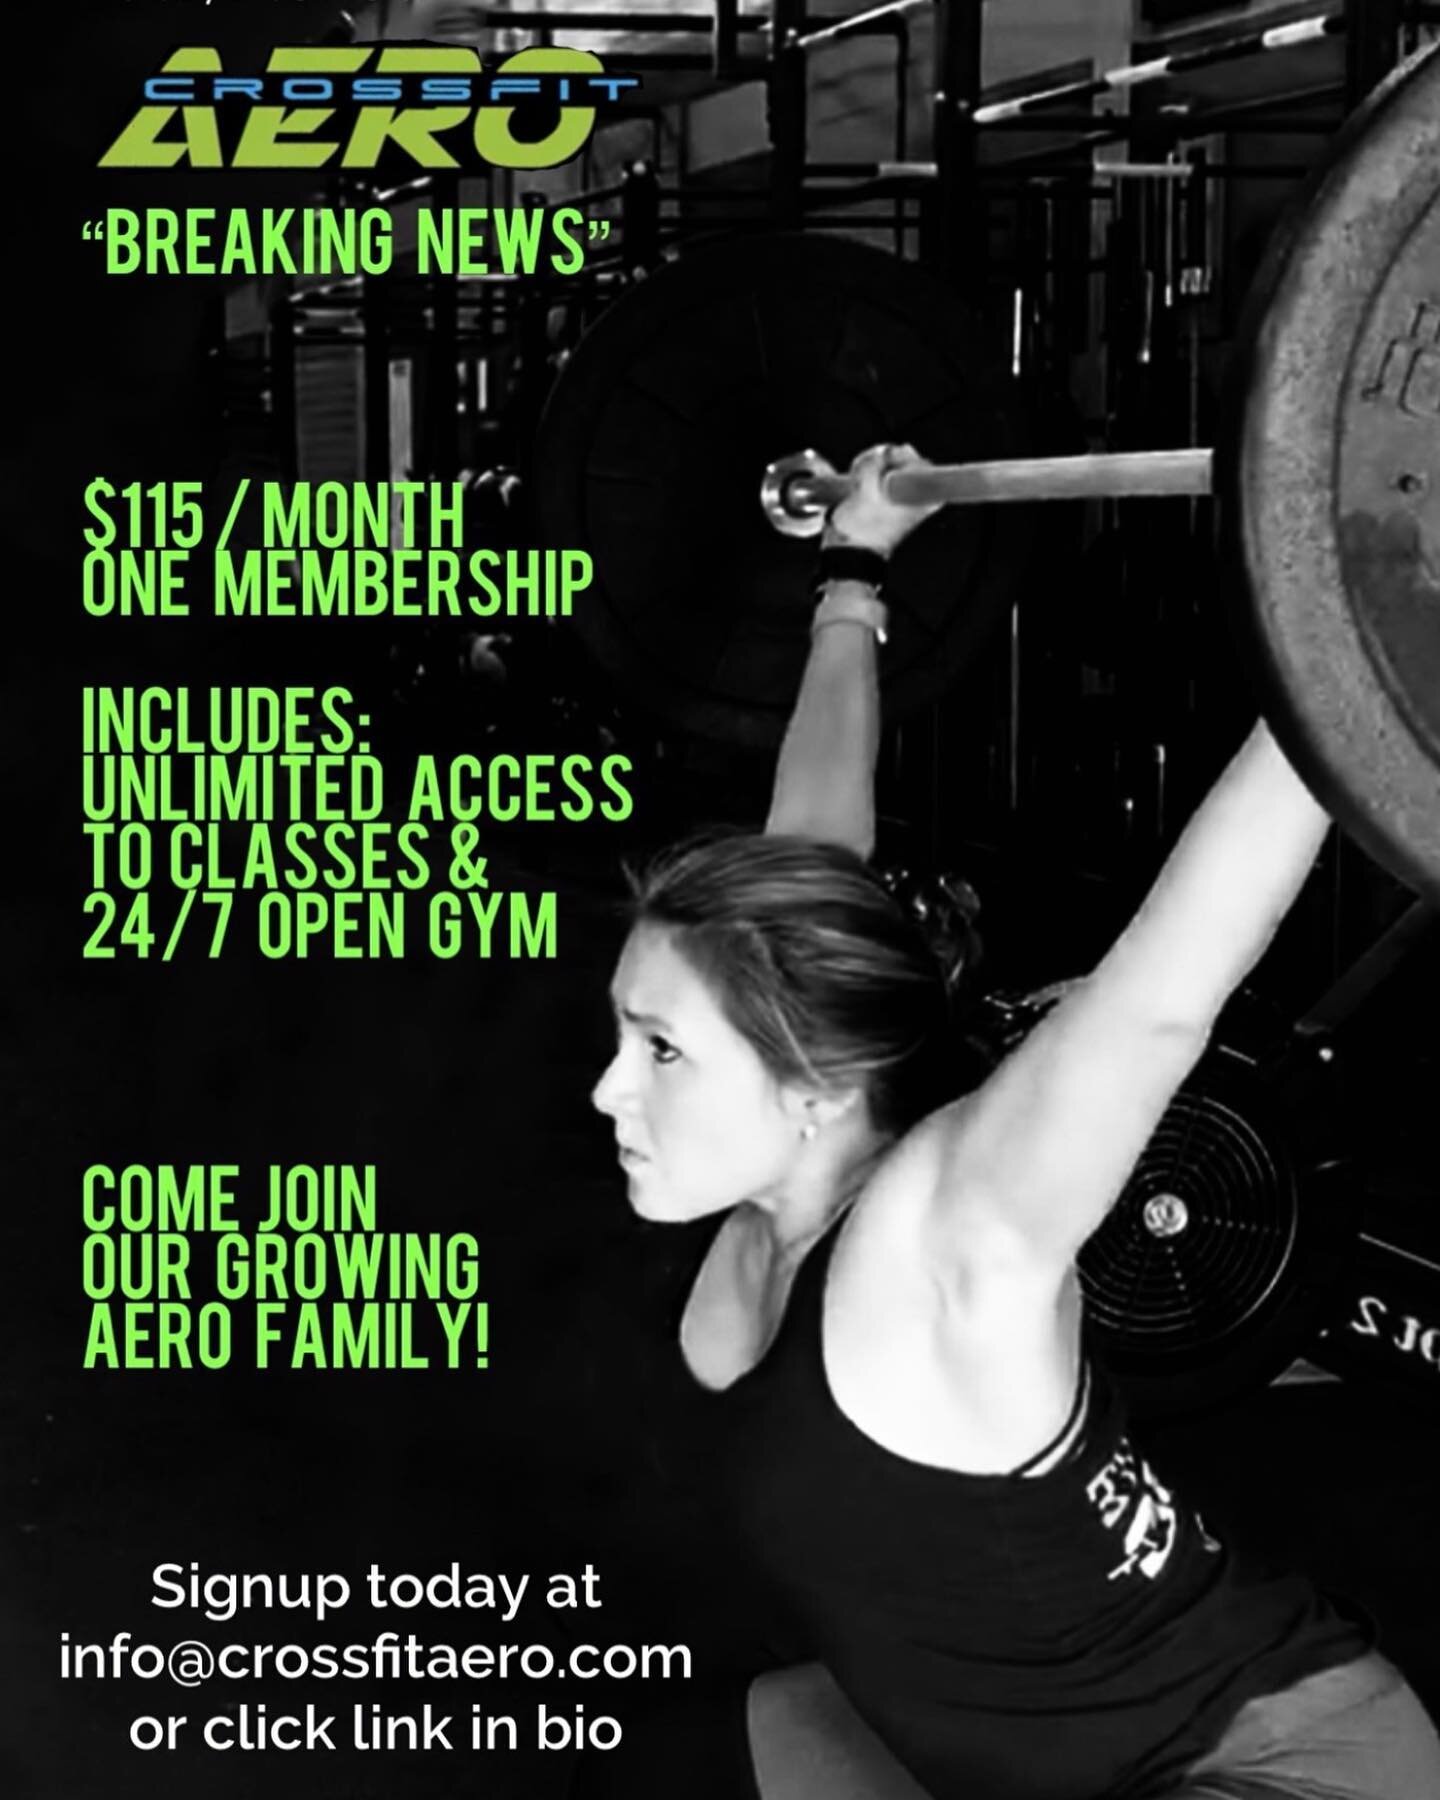 Effective Immediately.... We will only offer 1 Membership Option. We are calling this the &ldquo;One and Only Membership.&rdquo;

➡️ For $115 a month every member of the gym will have access to 100% of our Program Offerings. This includes: Unlimited 